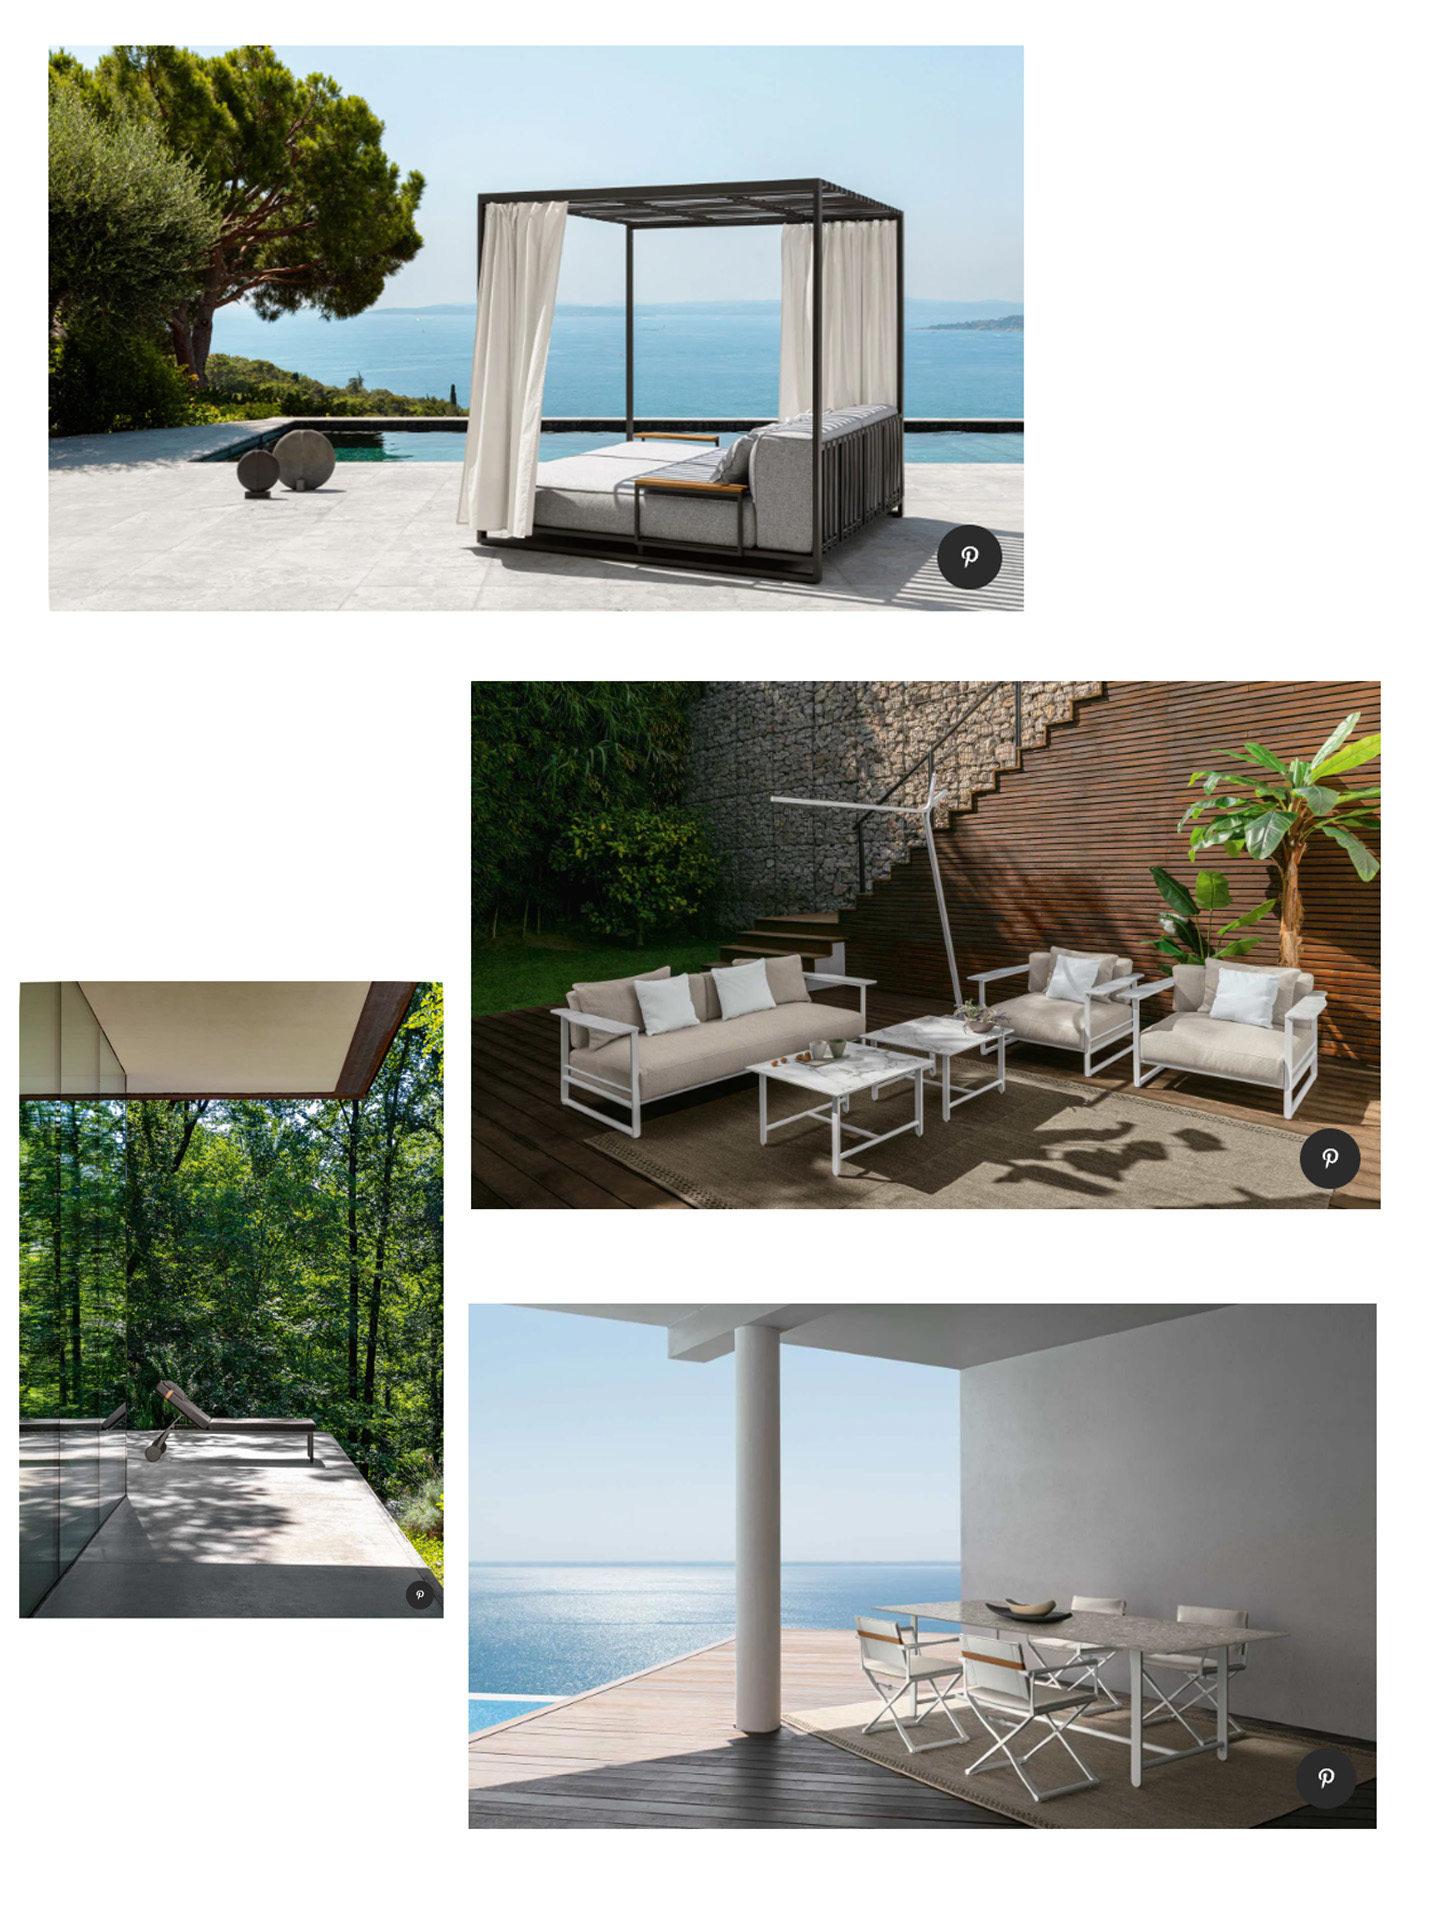 Article on the Riviera range of luxury garden furniture for talenti outdoor living created by the studio jean-philippe nuel in the magazine ad, design d'objets, french designer